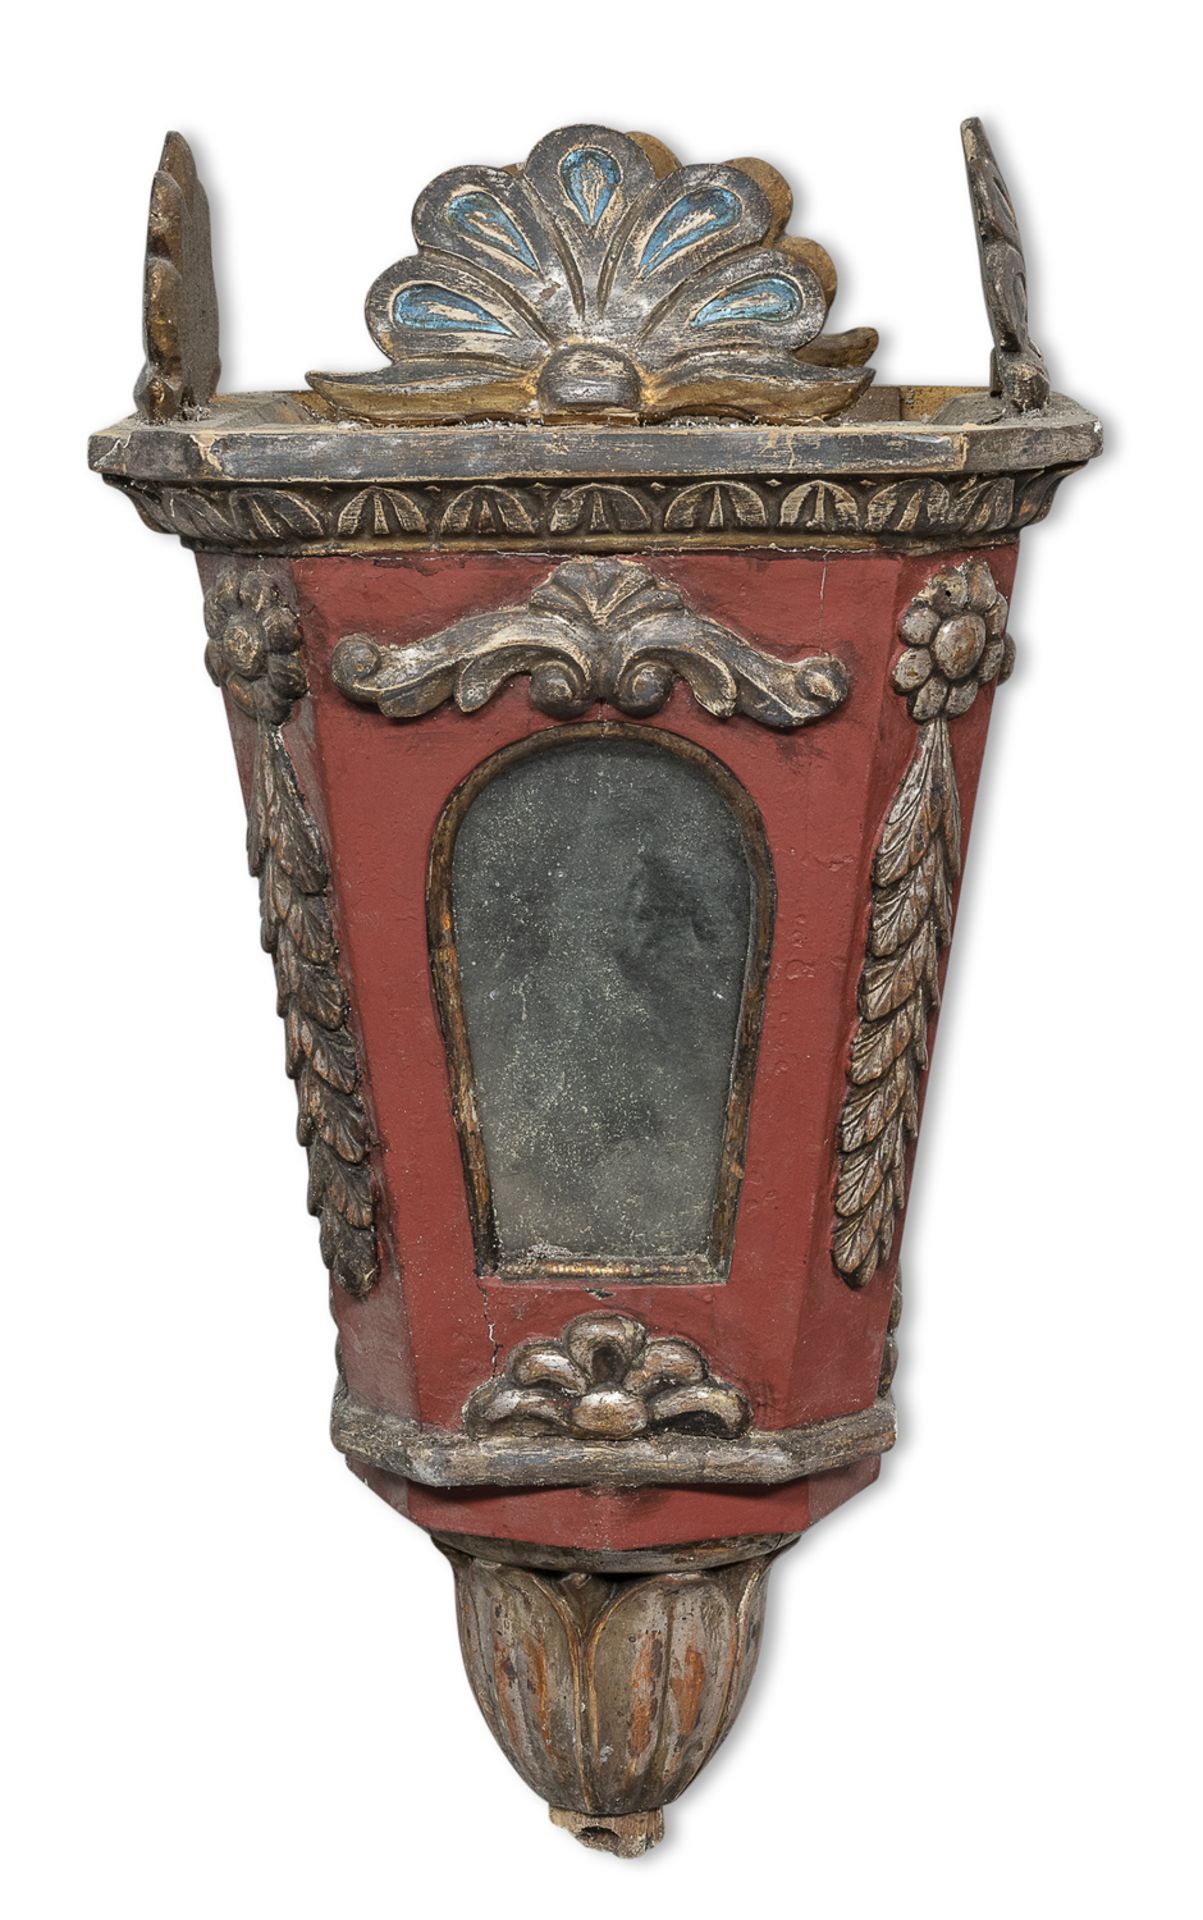 RED LACQUER WOODEN LANTERN CENTRAL ITALY 18th CENTURY